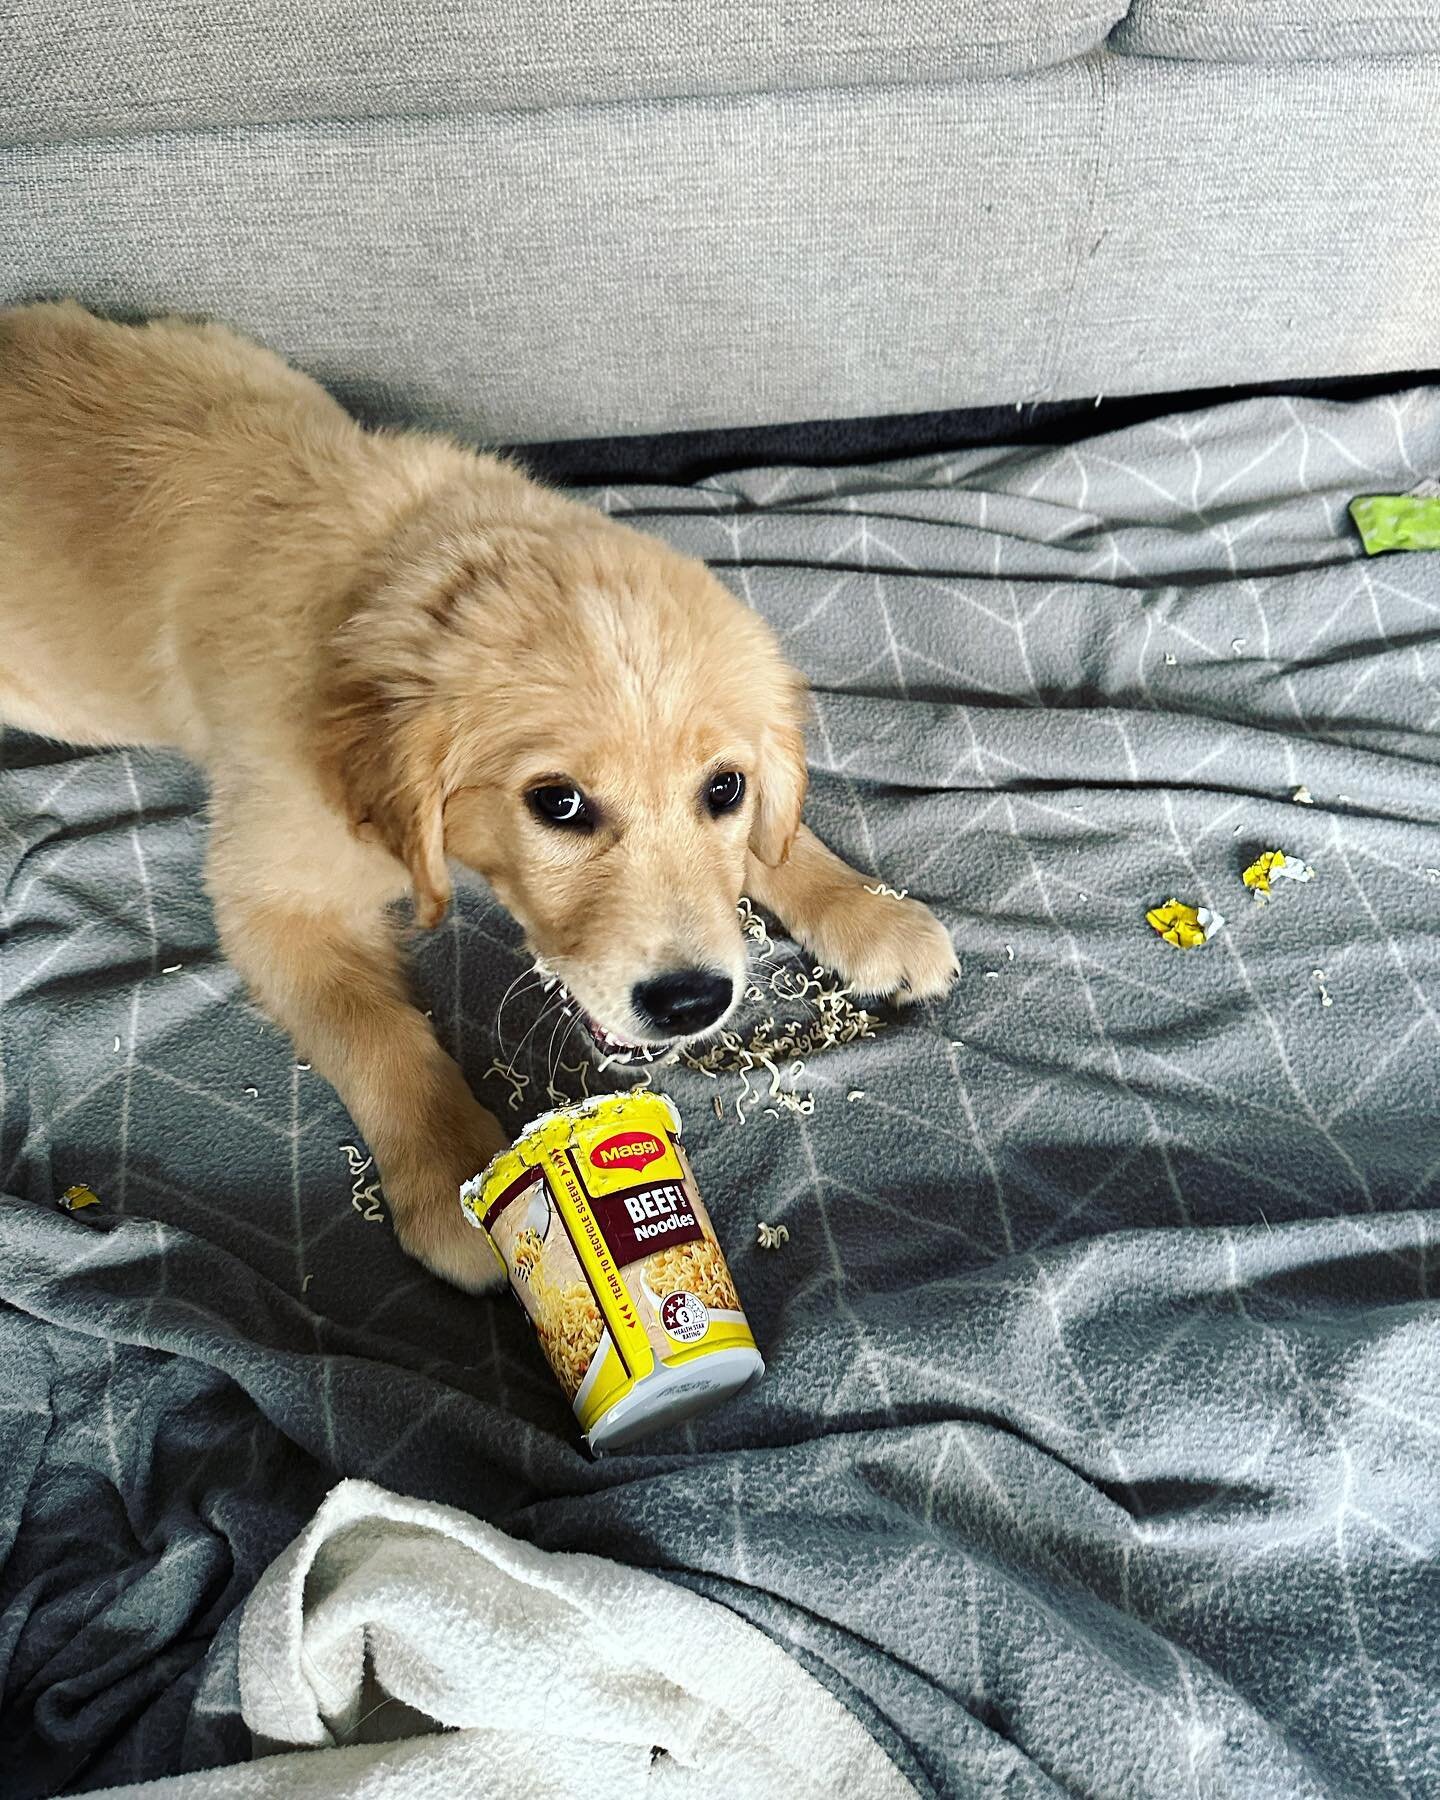 Someone has been very naughty helping themselves to the pantry. 

#naughtypuppy #florencethegoldenretriever #goldenretrieversofinstagram #goldenretriever